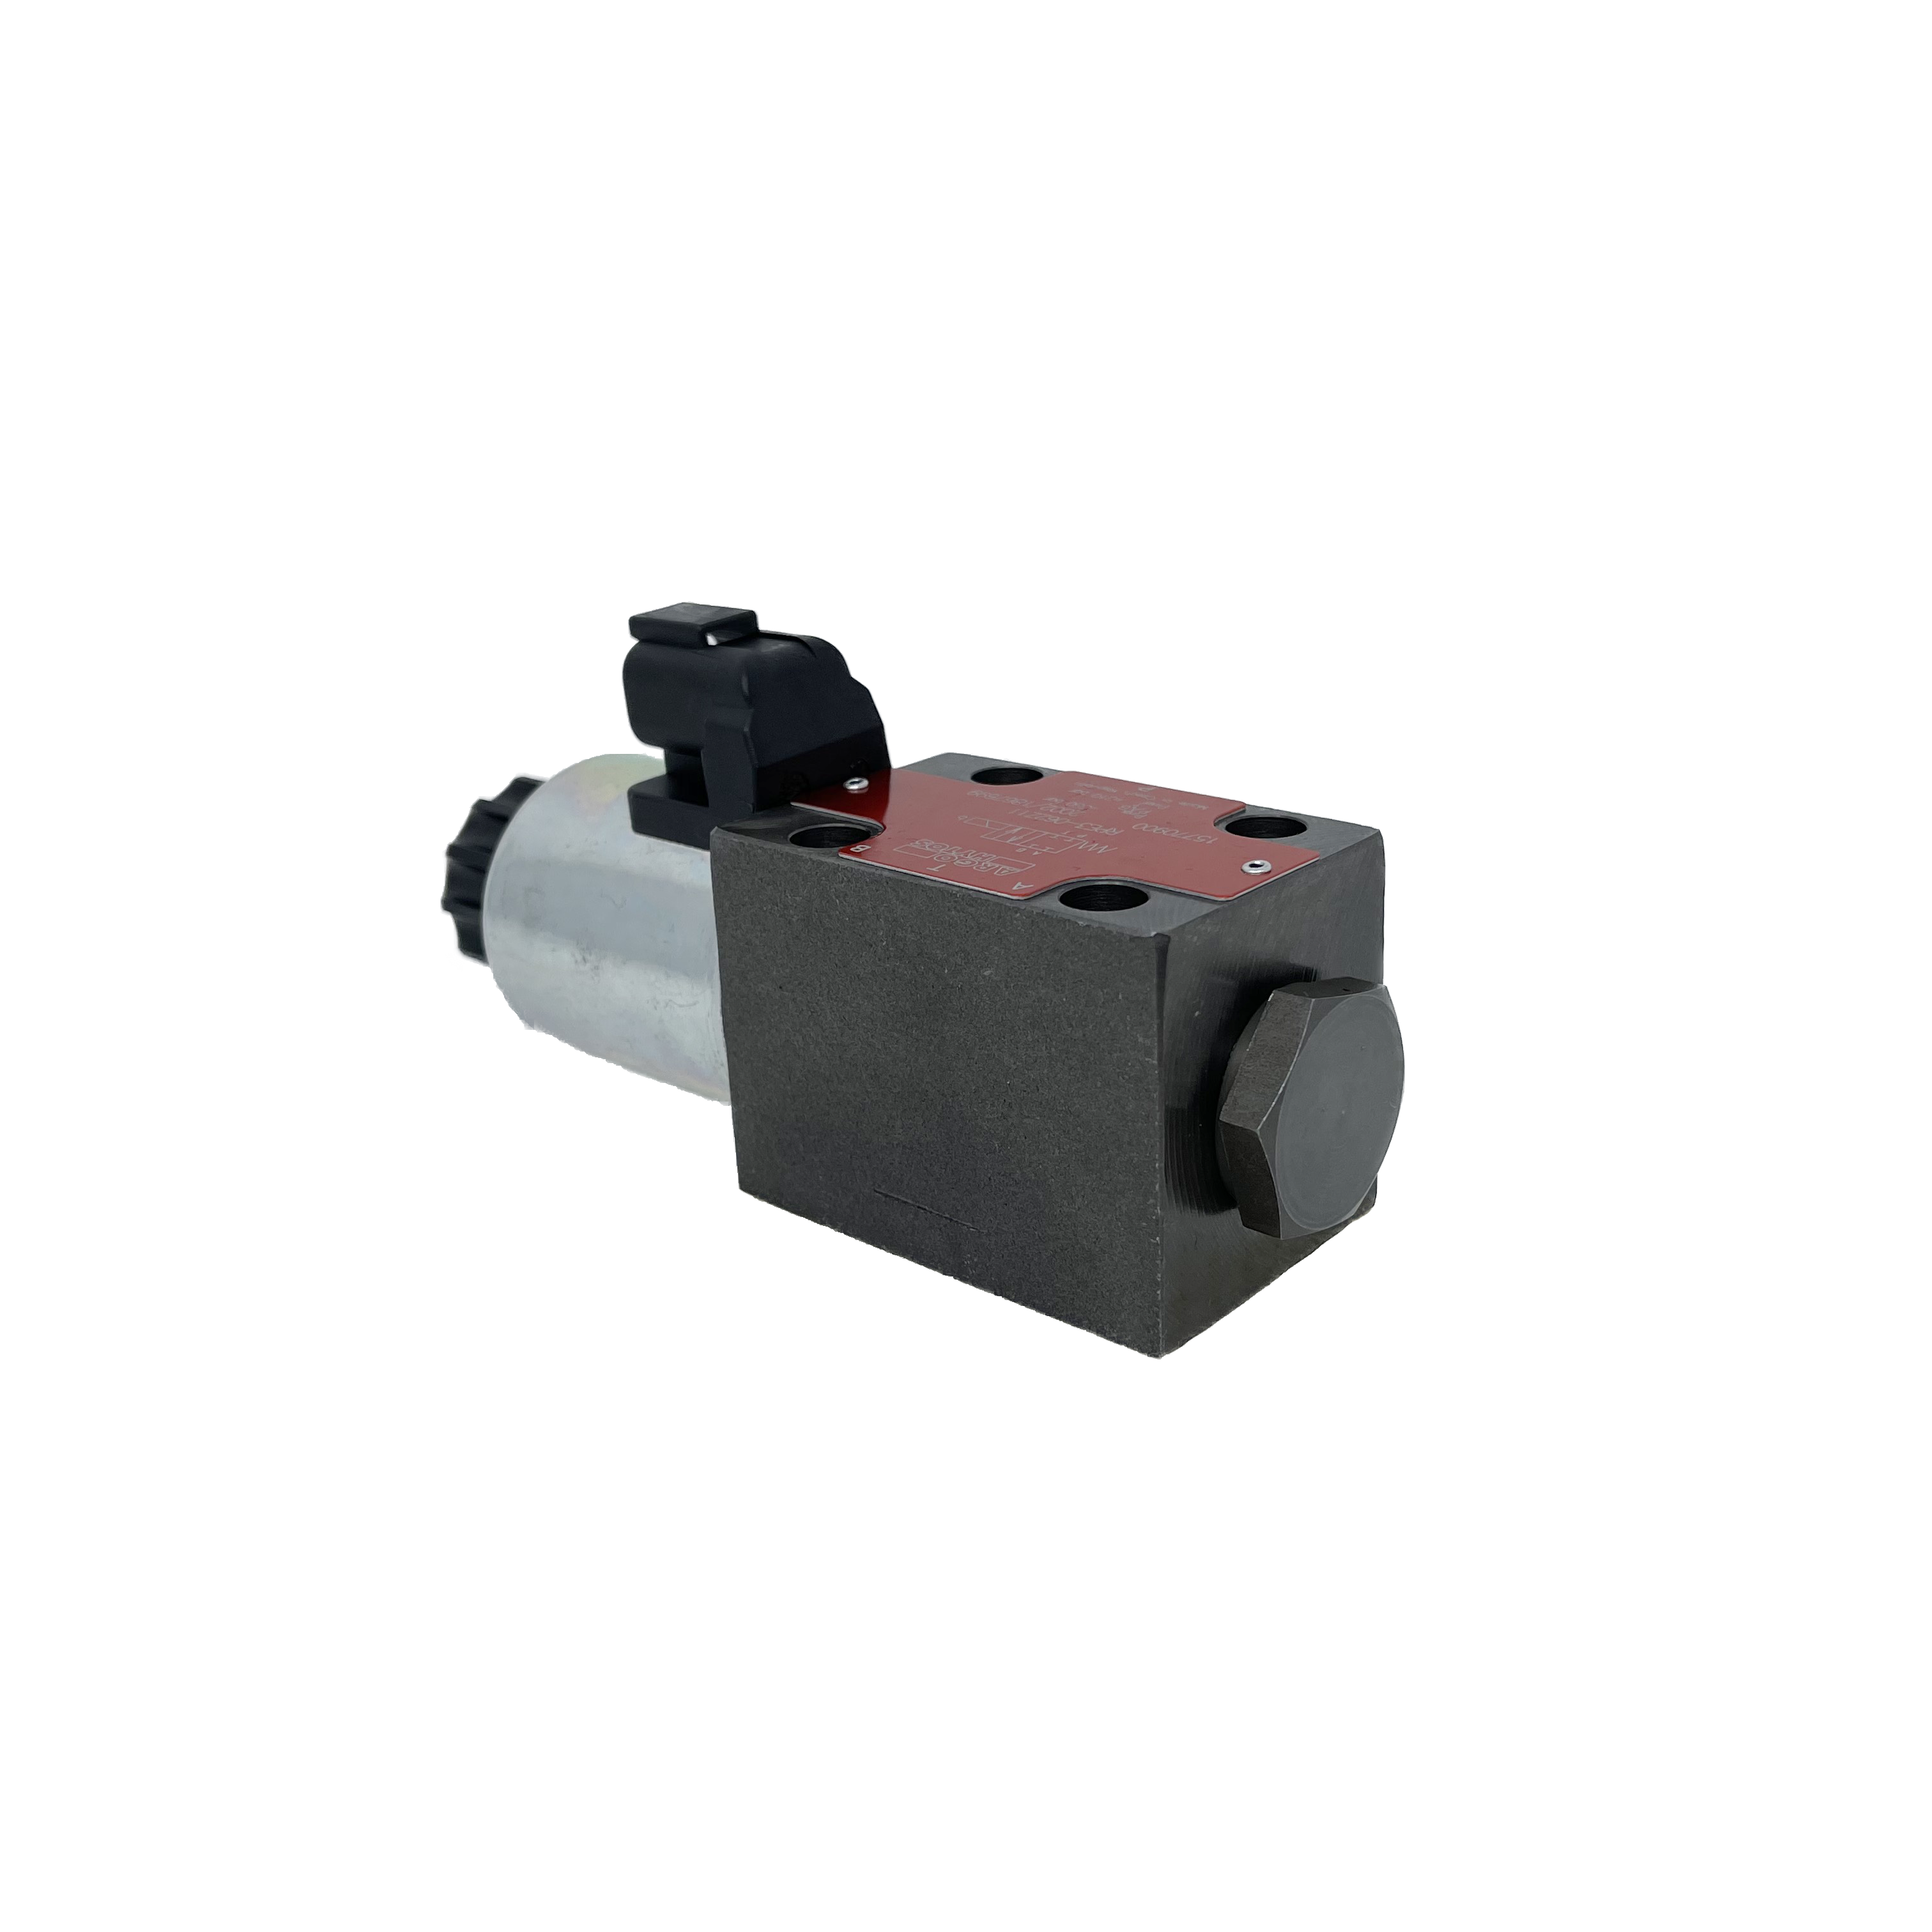 RPE3-062R21/01200E12A : Argo Hytos Directional Control Valve, D03 (NG6), 21GPM, 5100psi, 2P4W, 12 VDC, Deutsch, Spring Return, P to A, B to T in Neutral, Coil Side A